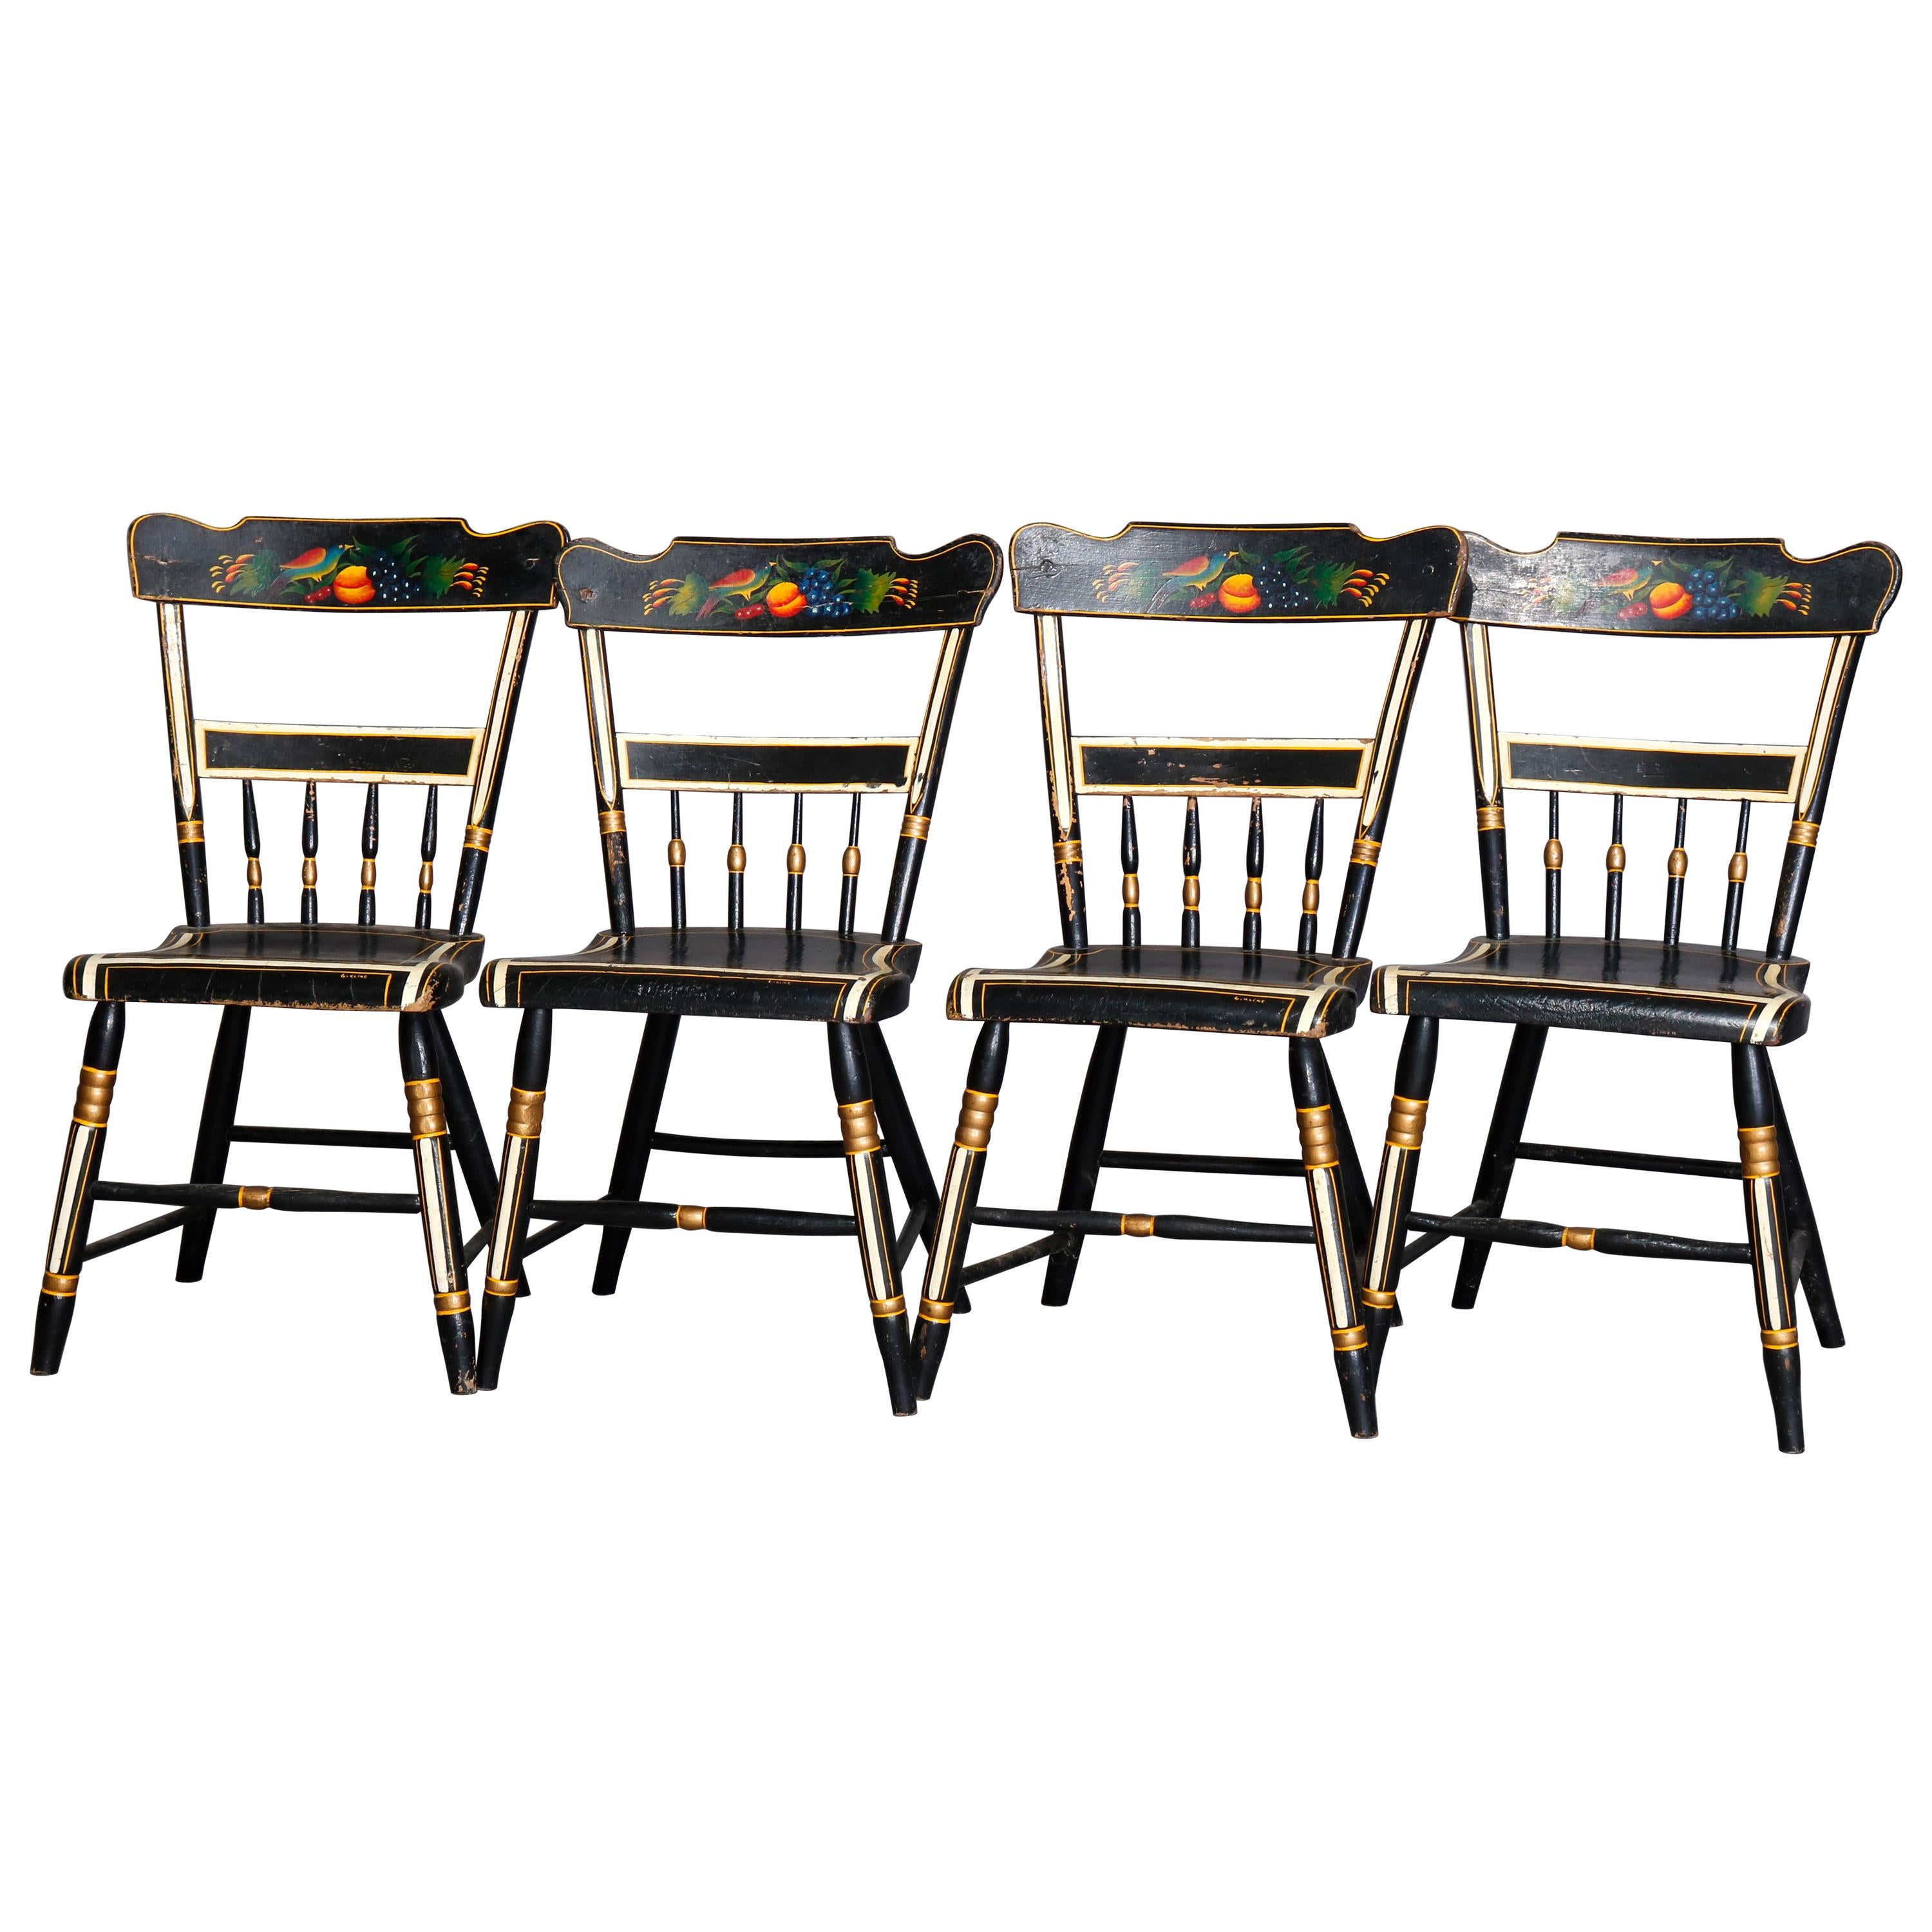 Four Paint and Gilt Decorated Hitchcock Style Side Chairs, 19th Century